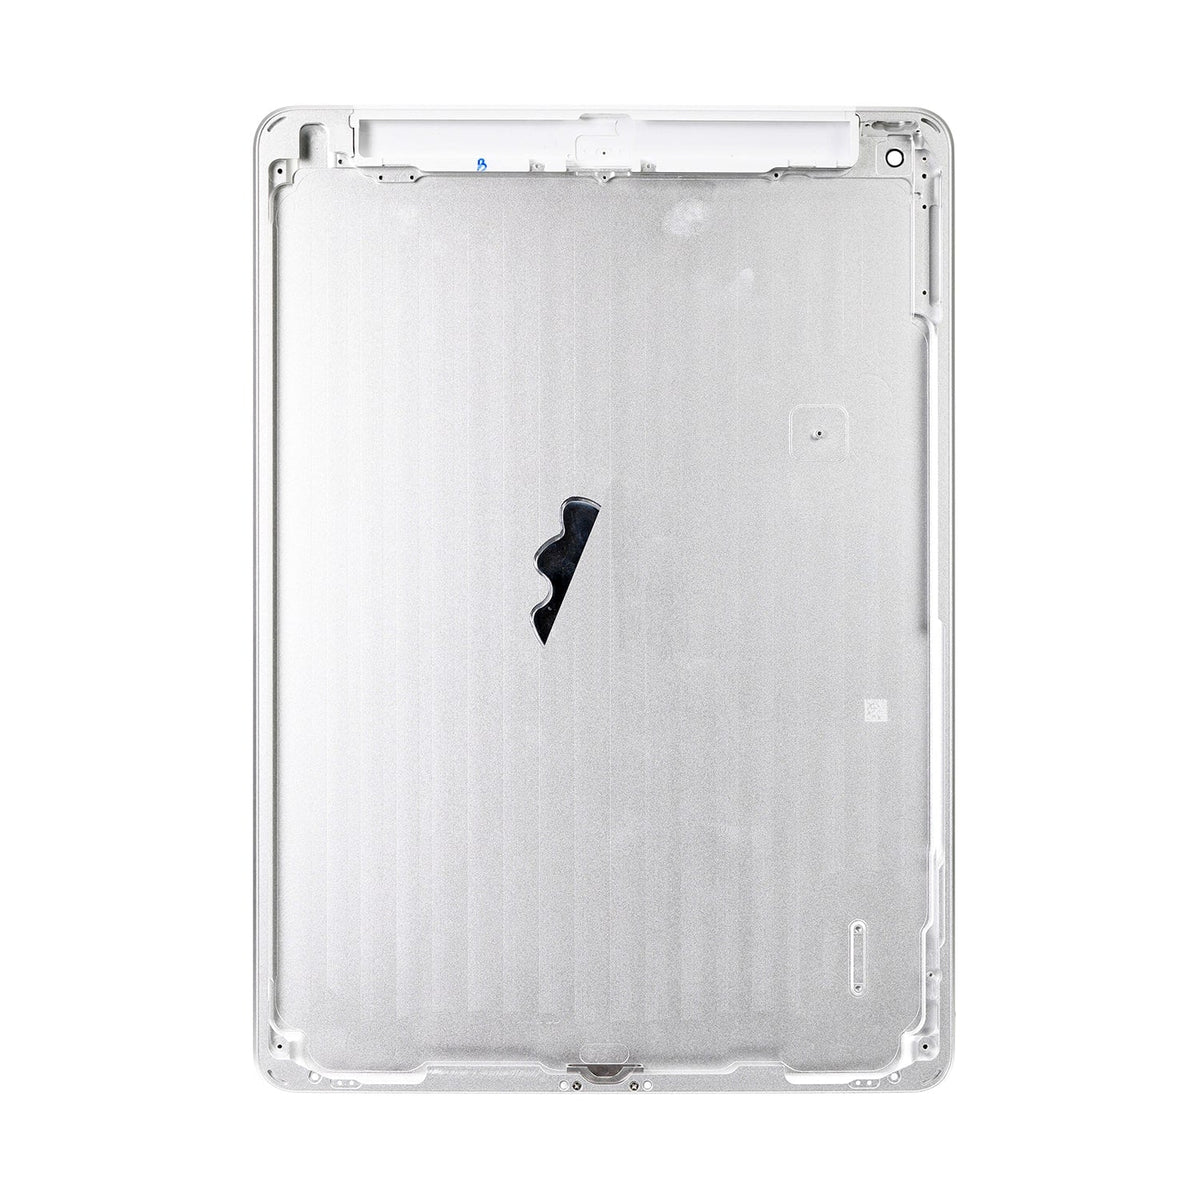 SILVER BACK COVER (4G VERSION) FOR IPAD 5